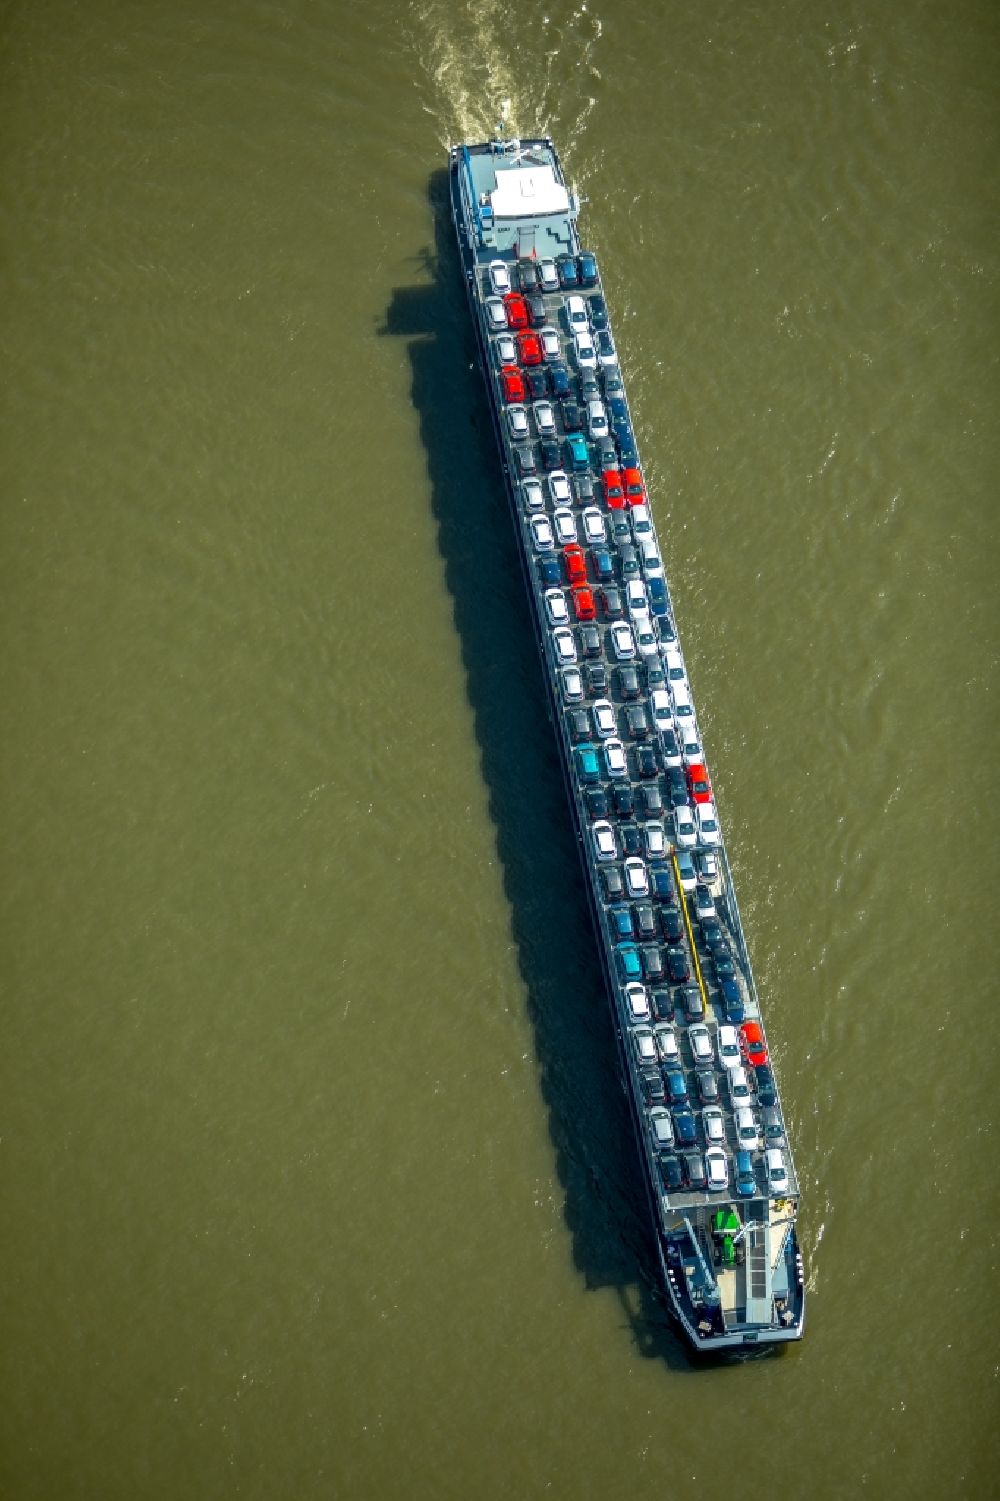 Aerial photograph Duisburg - Cargo ship on the inland shipping waterway of the river course of the Rhine river in Duisburg in the state North Rhine-Westphalia, Germany